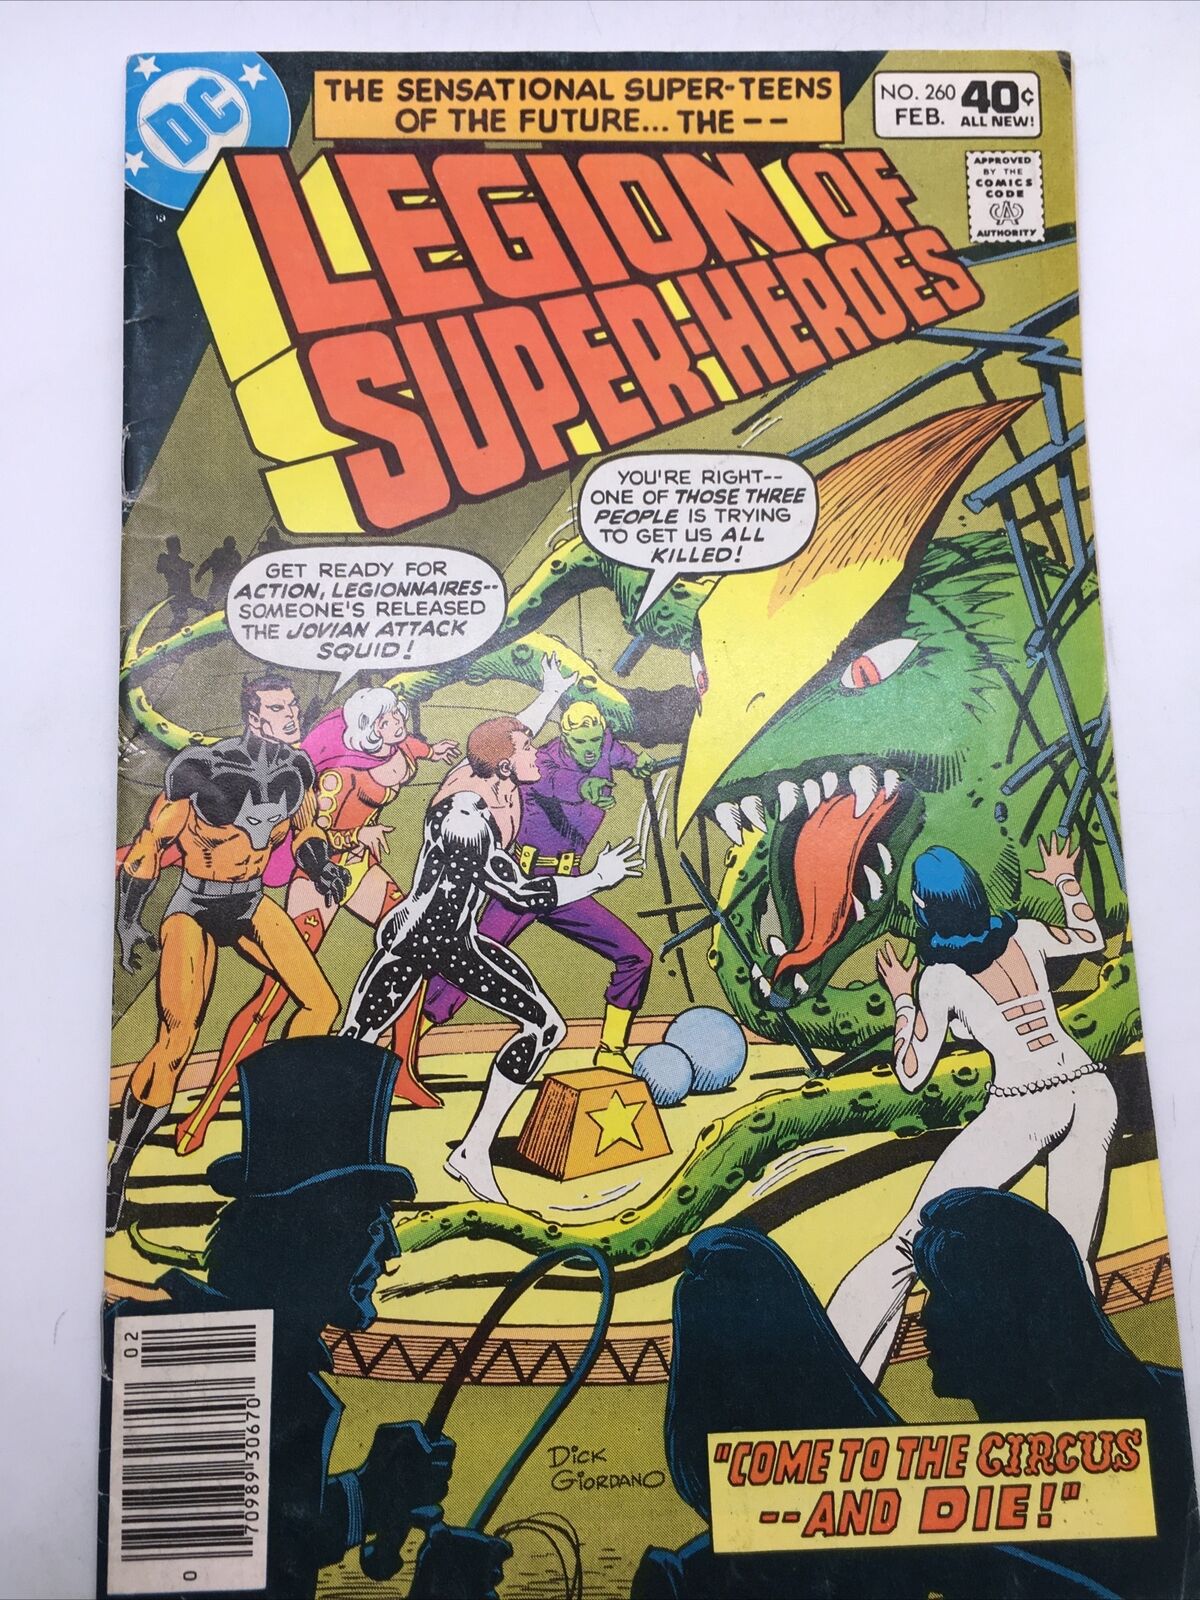 Legion of Super-Heroes #260  1st Issue with no Superboy   1980